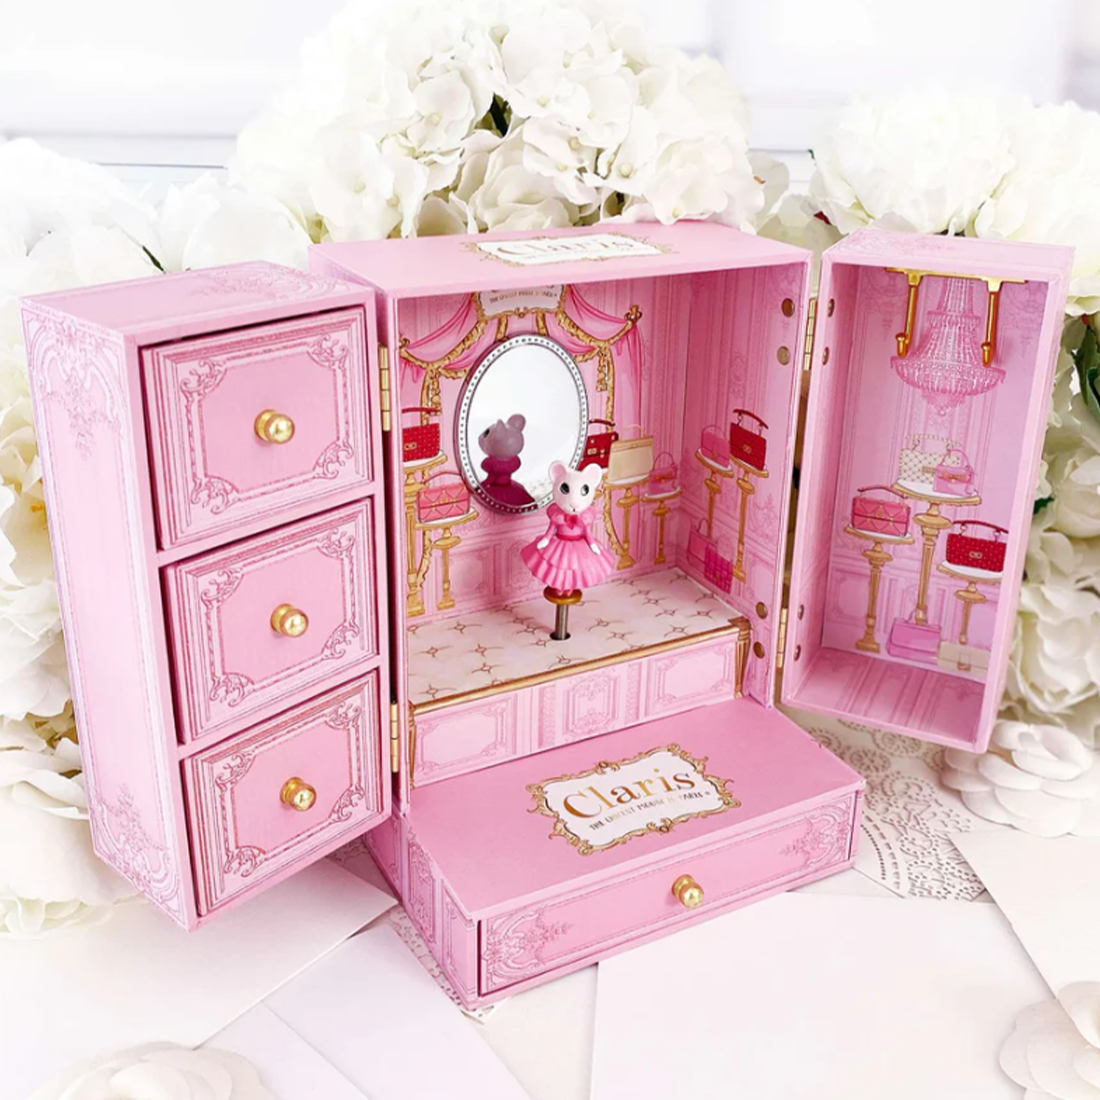 Claris - The Chicest Mouse in Paris™ Musical Jewellery Box